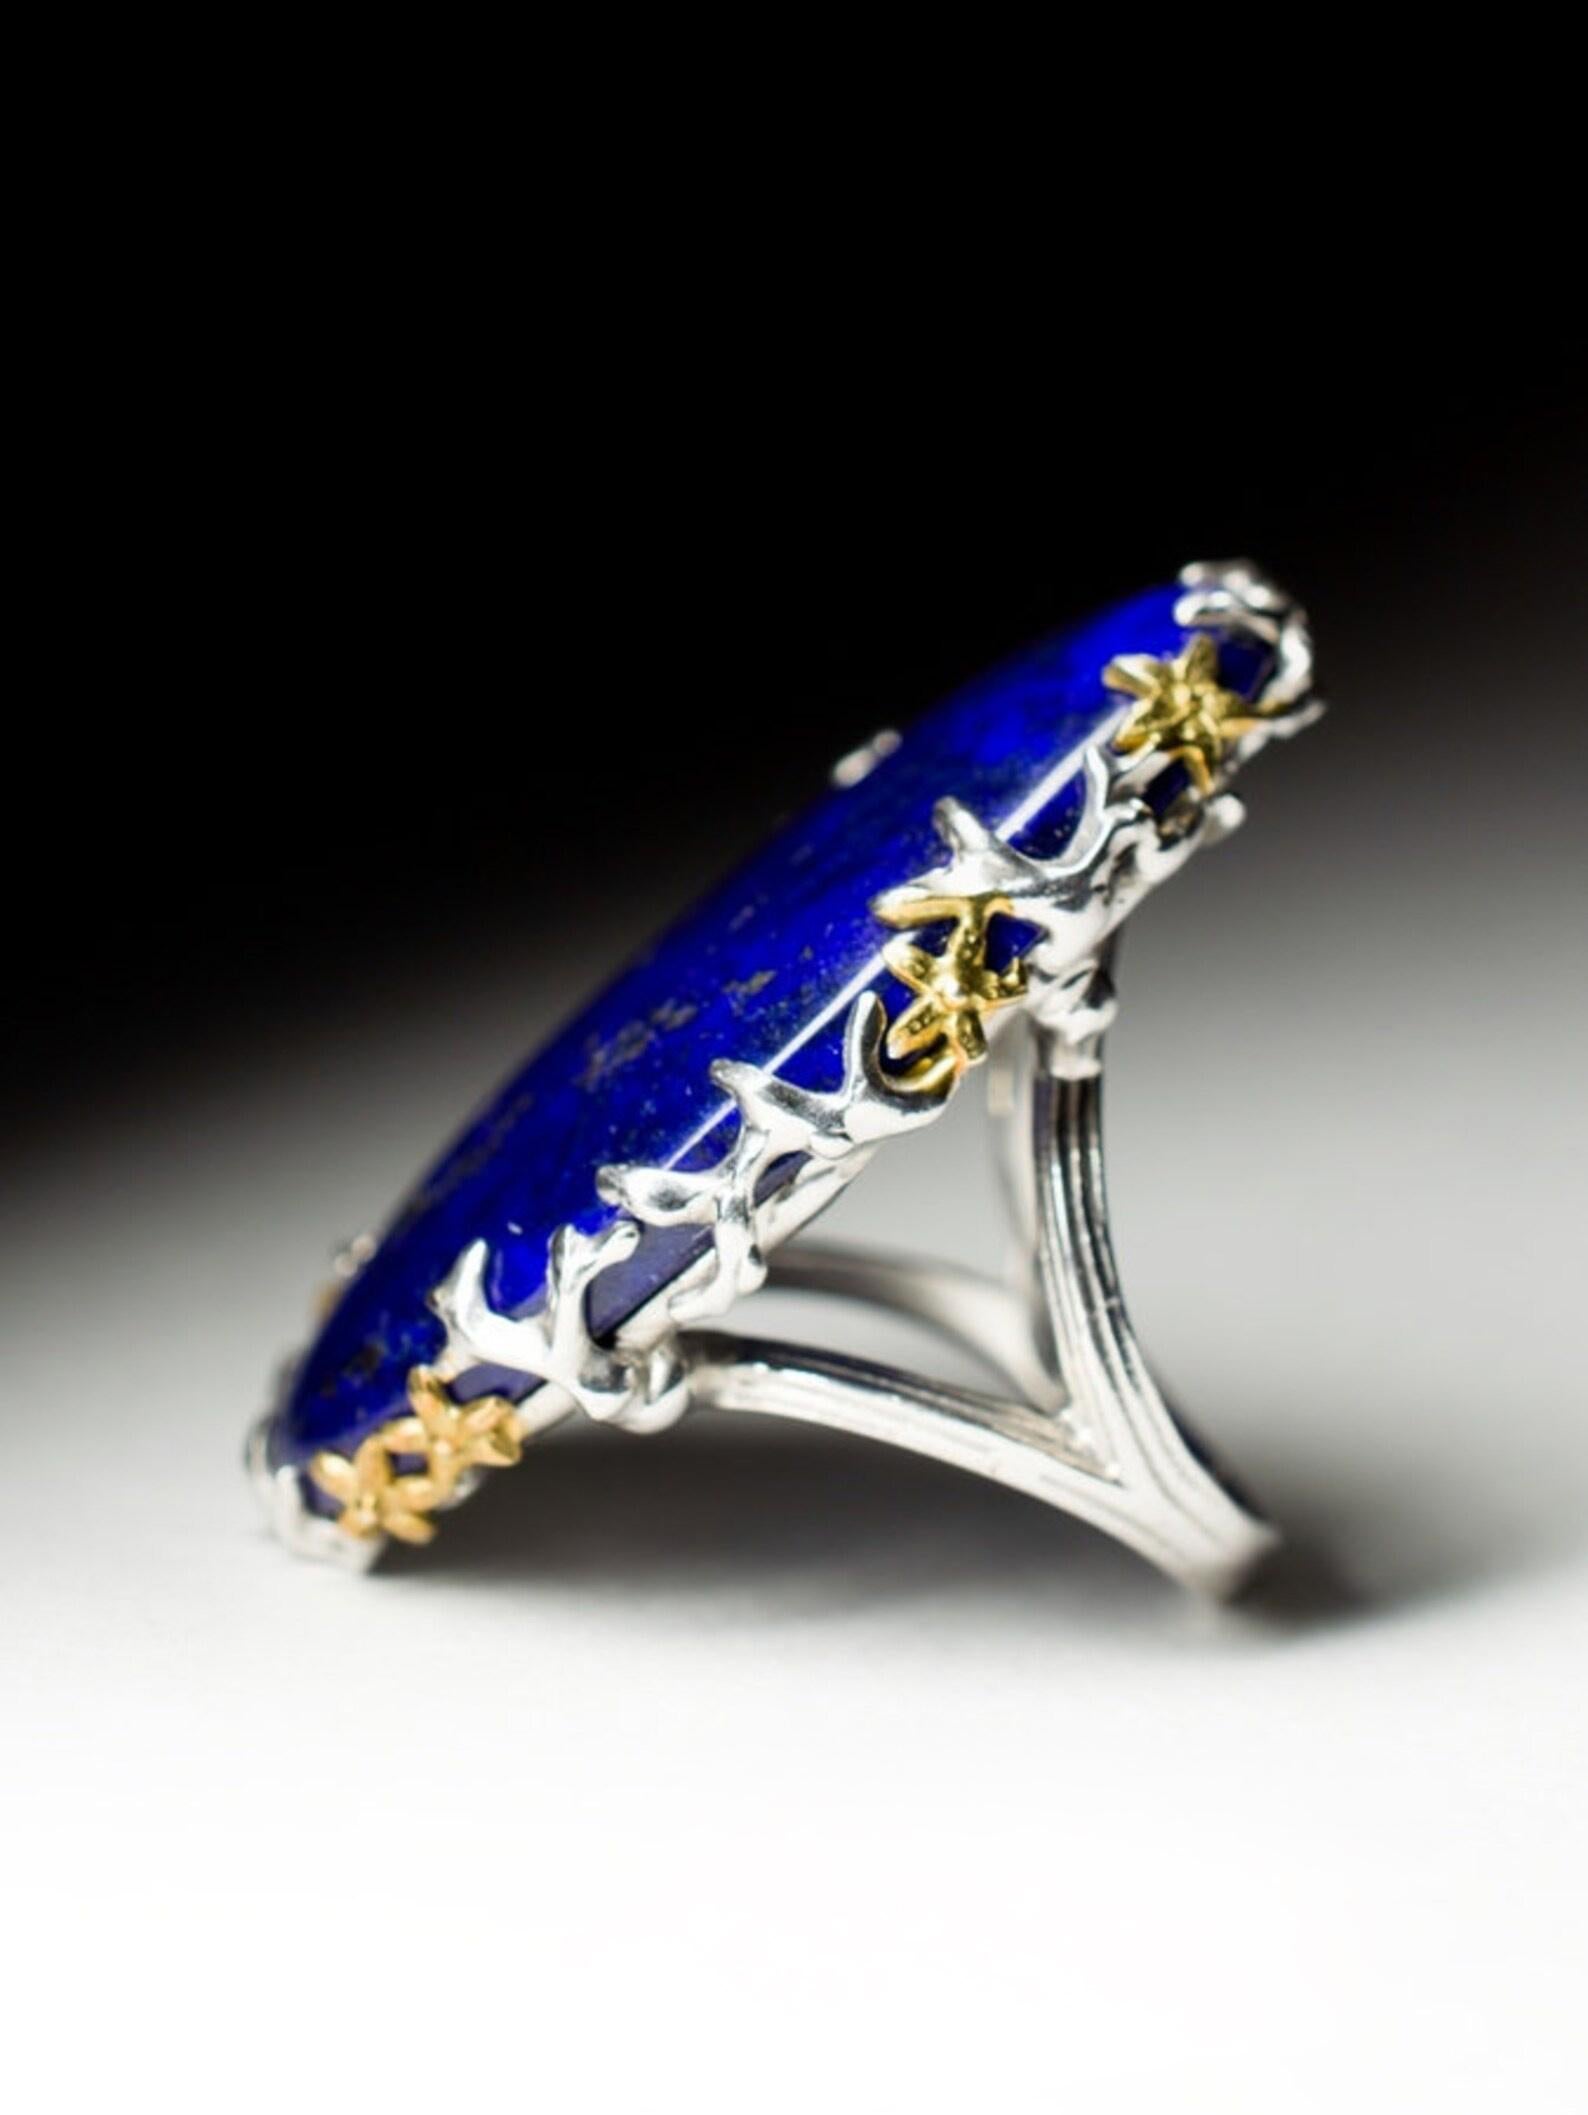 Big Lapis Lazuli Silver Ring Natural Blue Gemstone Fine Unisex Jewelry LOTR In New Condition For Sale In Berlin, DE